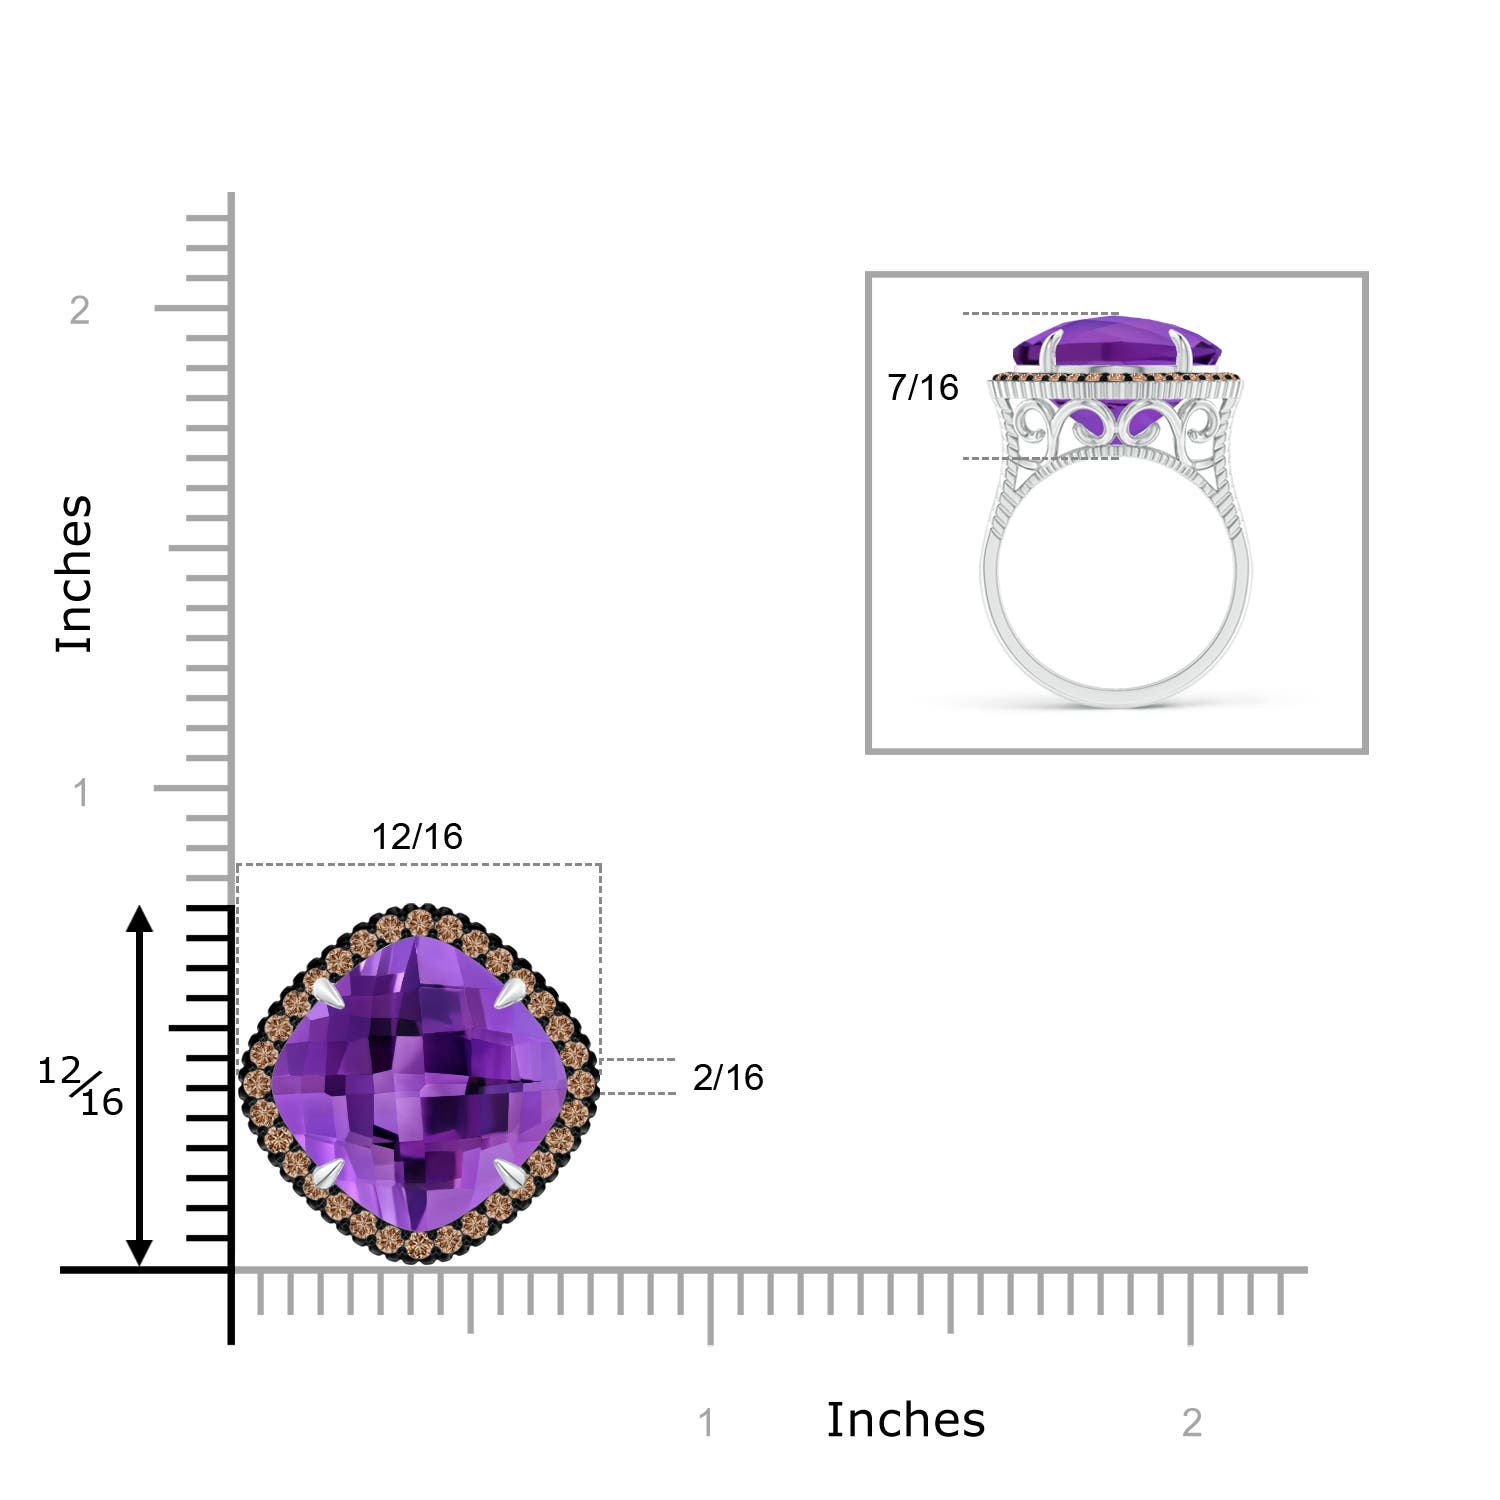 AAA - Amethyst / 8.38 CT / 14 KT White Gold